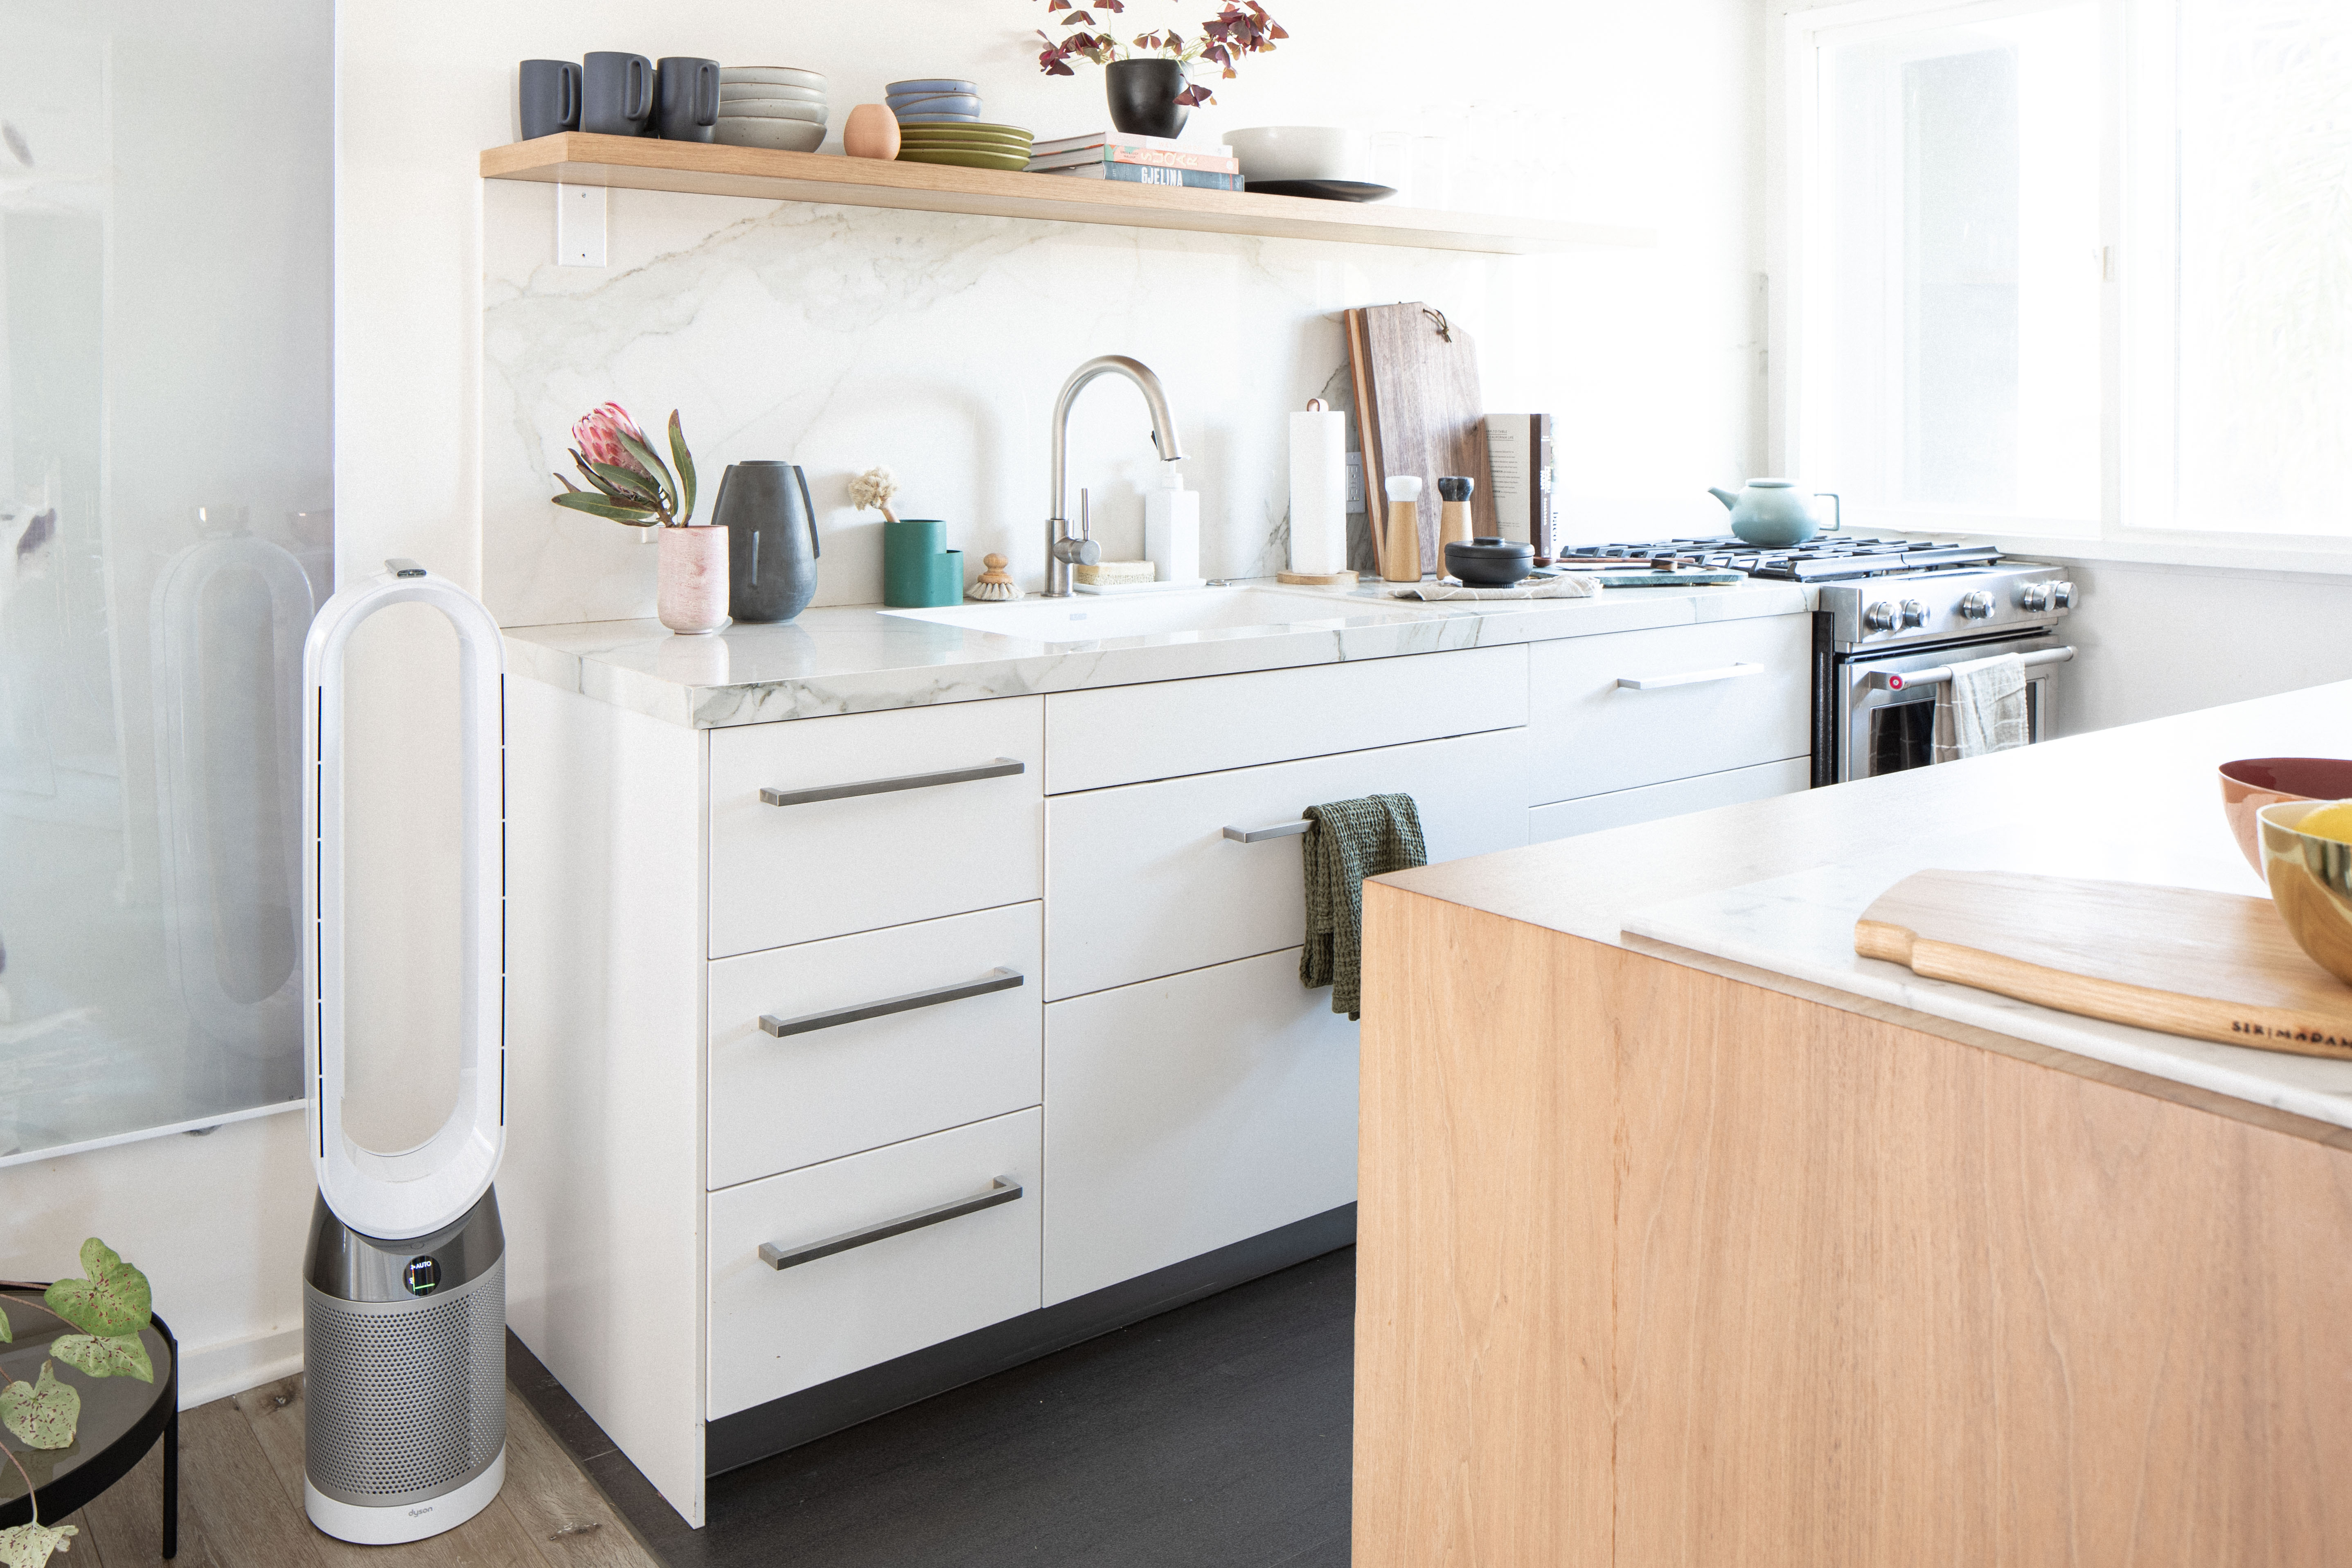 Homeowners Guide To Unclogging Kitchen Or Your Bathroom Sink In